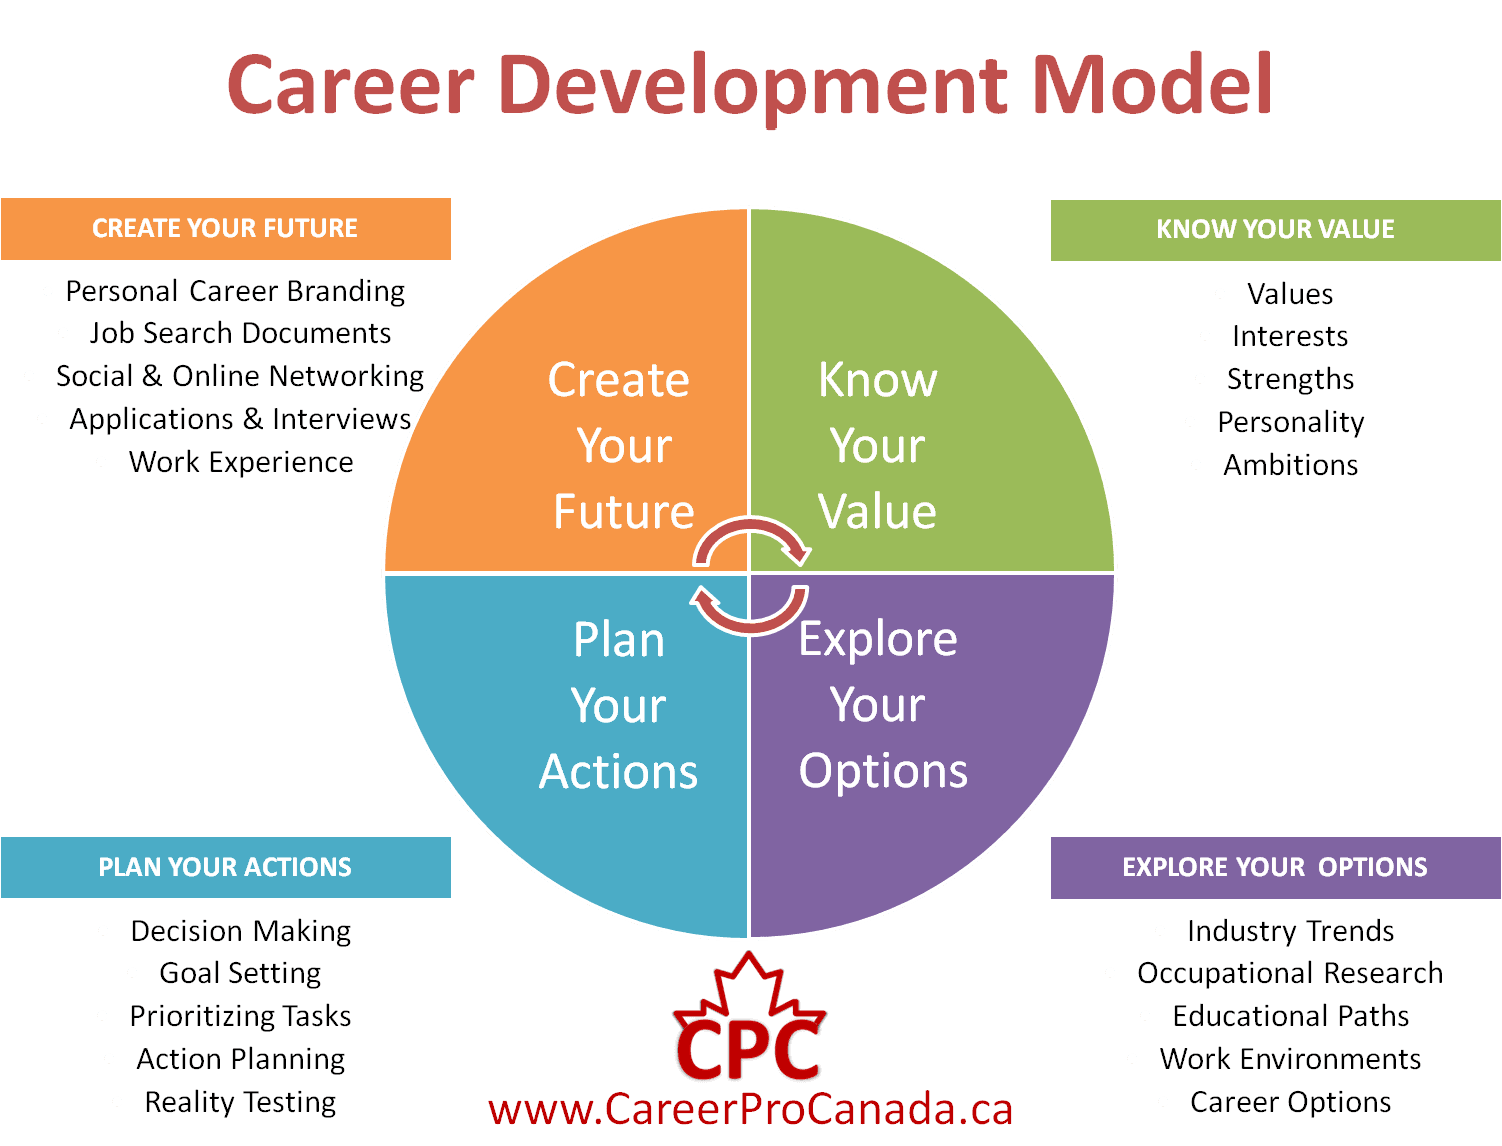 personal career action plan